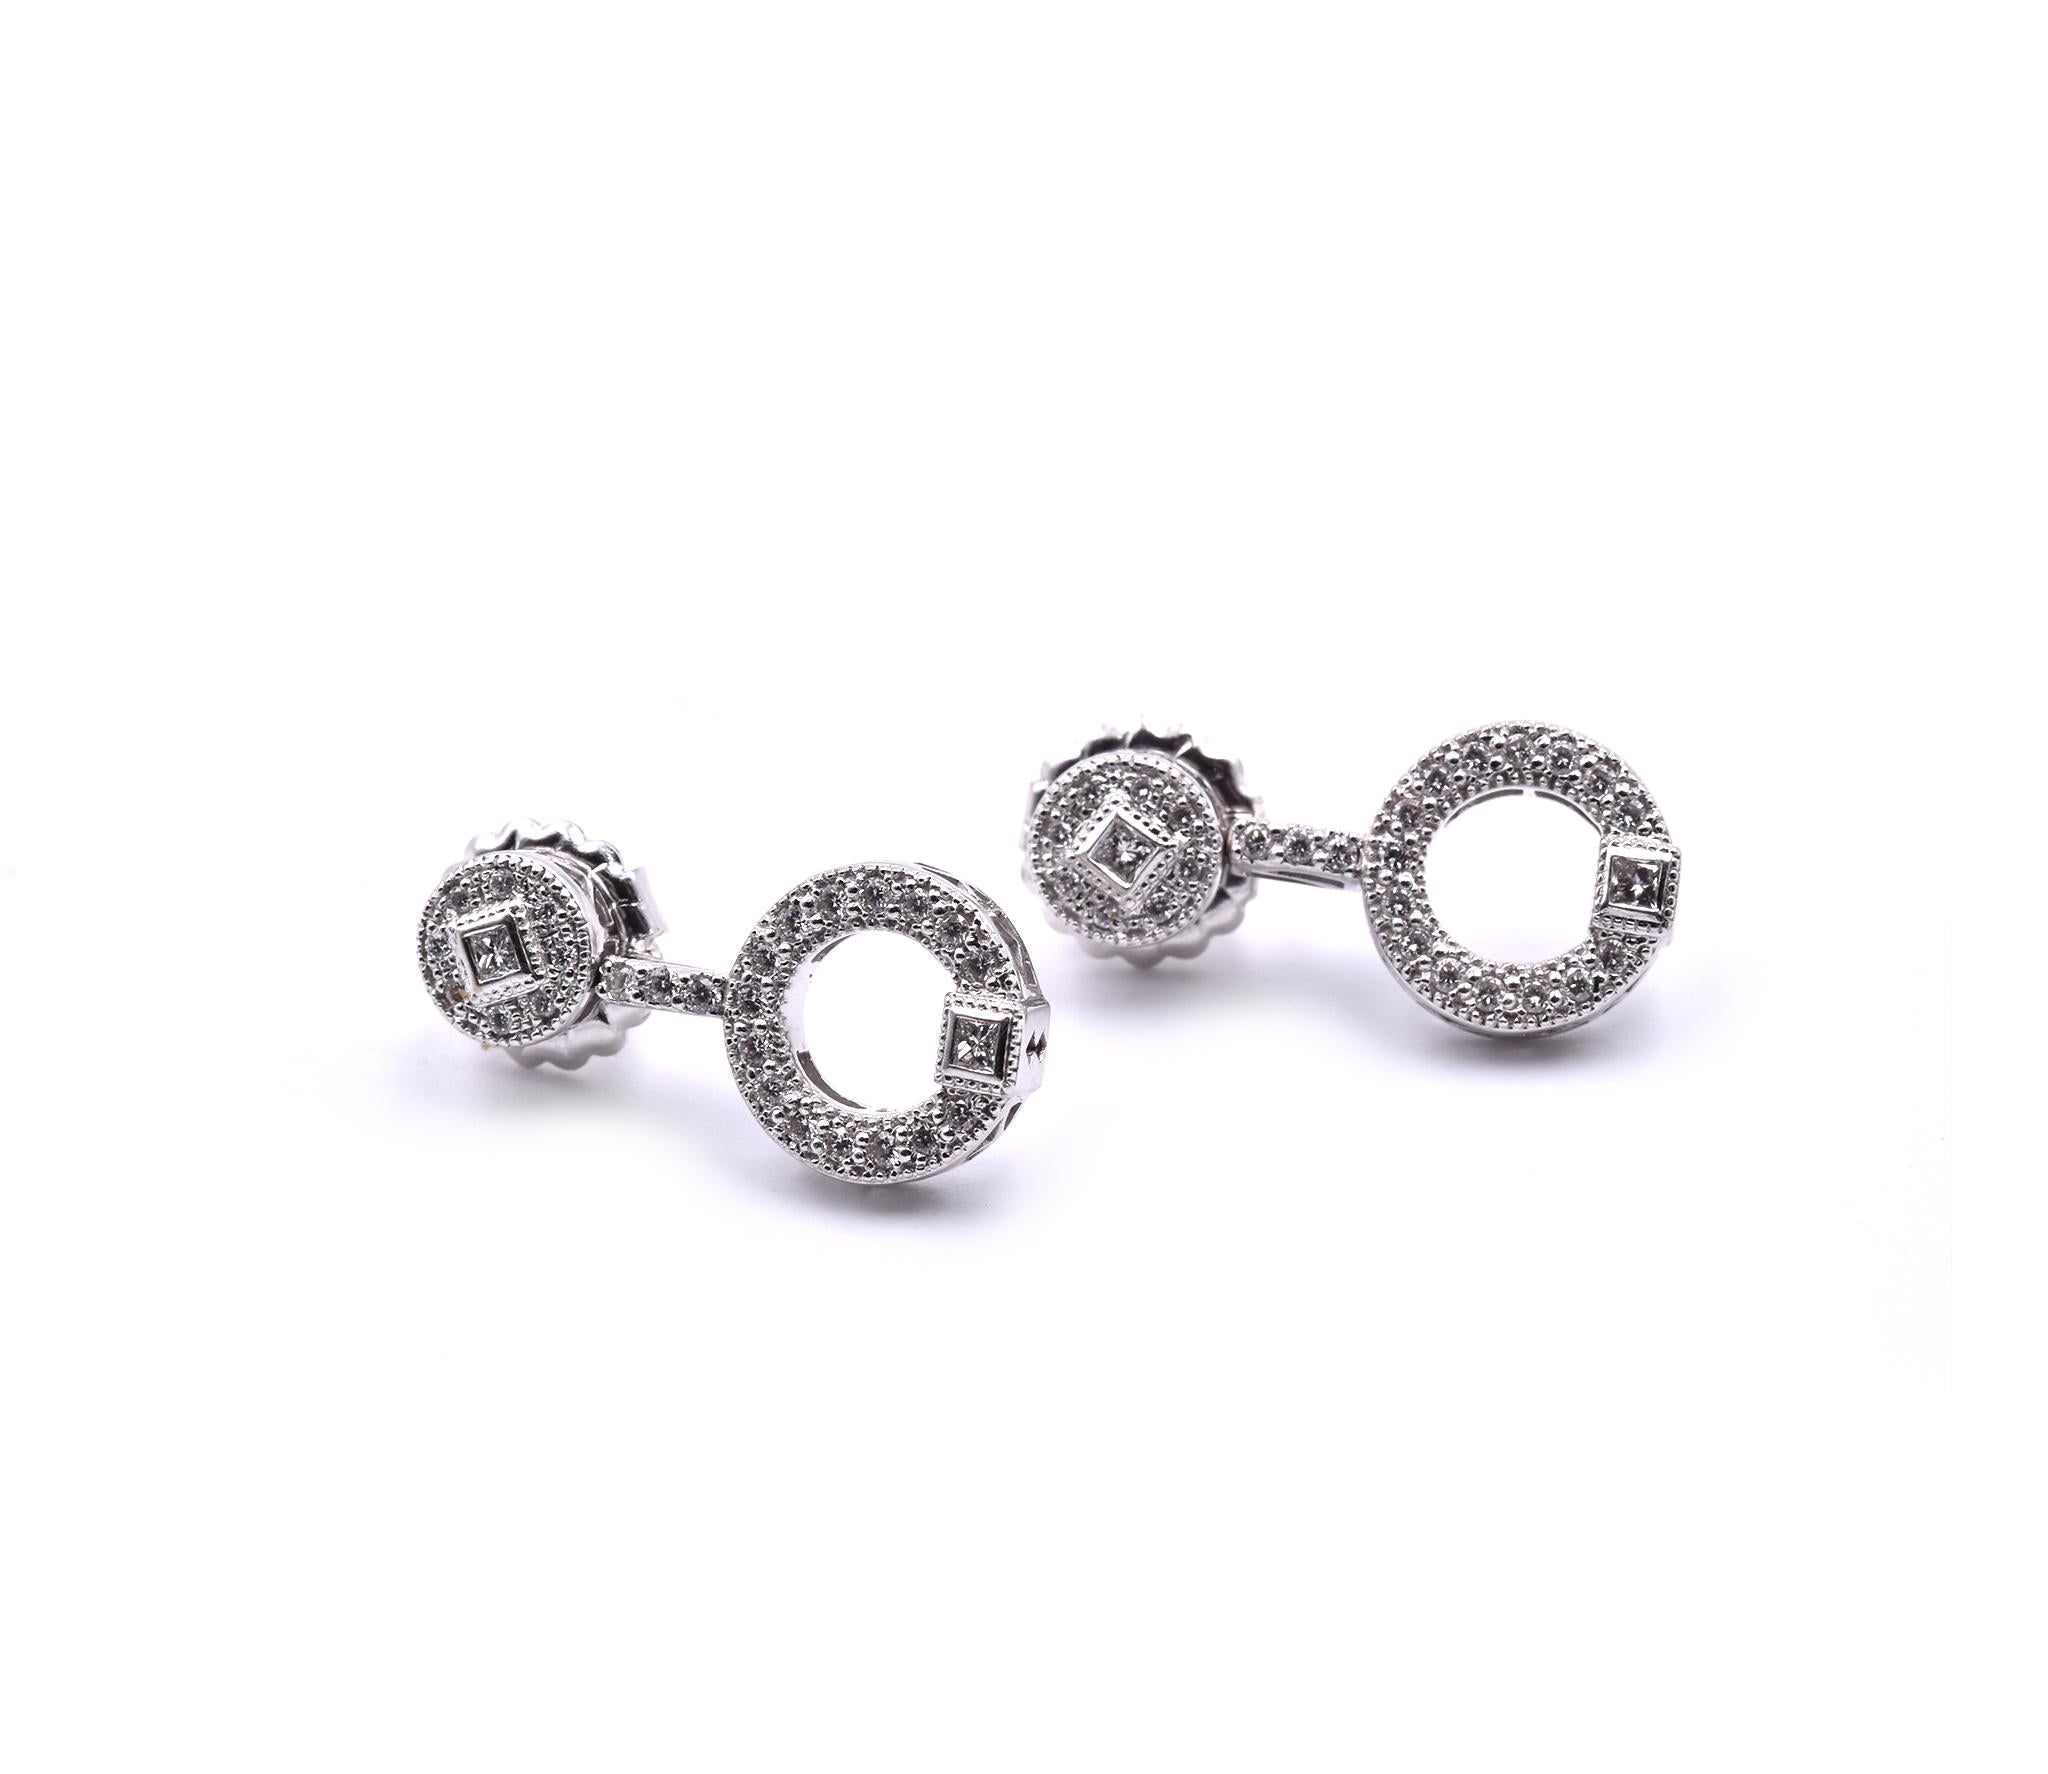 Designer: custom design
Material: 18k white gold
Diamonds: 56 round brilliant cut = 1.12cttw
Color: G
Clarity: VS
Dimensions: earrings are approximately 23.60mm in length and 11.64mm wide
Fastenings: post with friction backs
Weight: 6.54 grams
